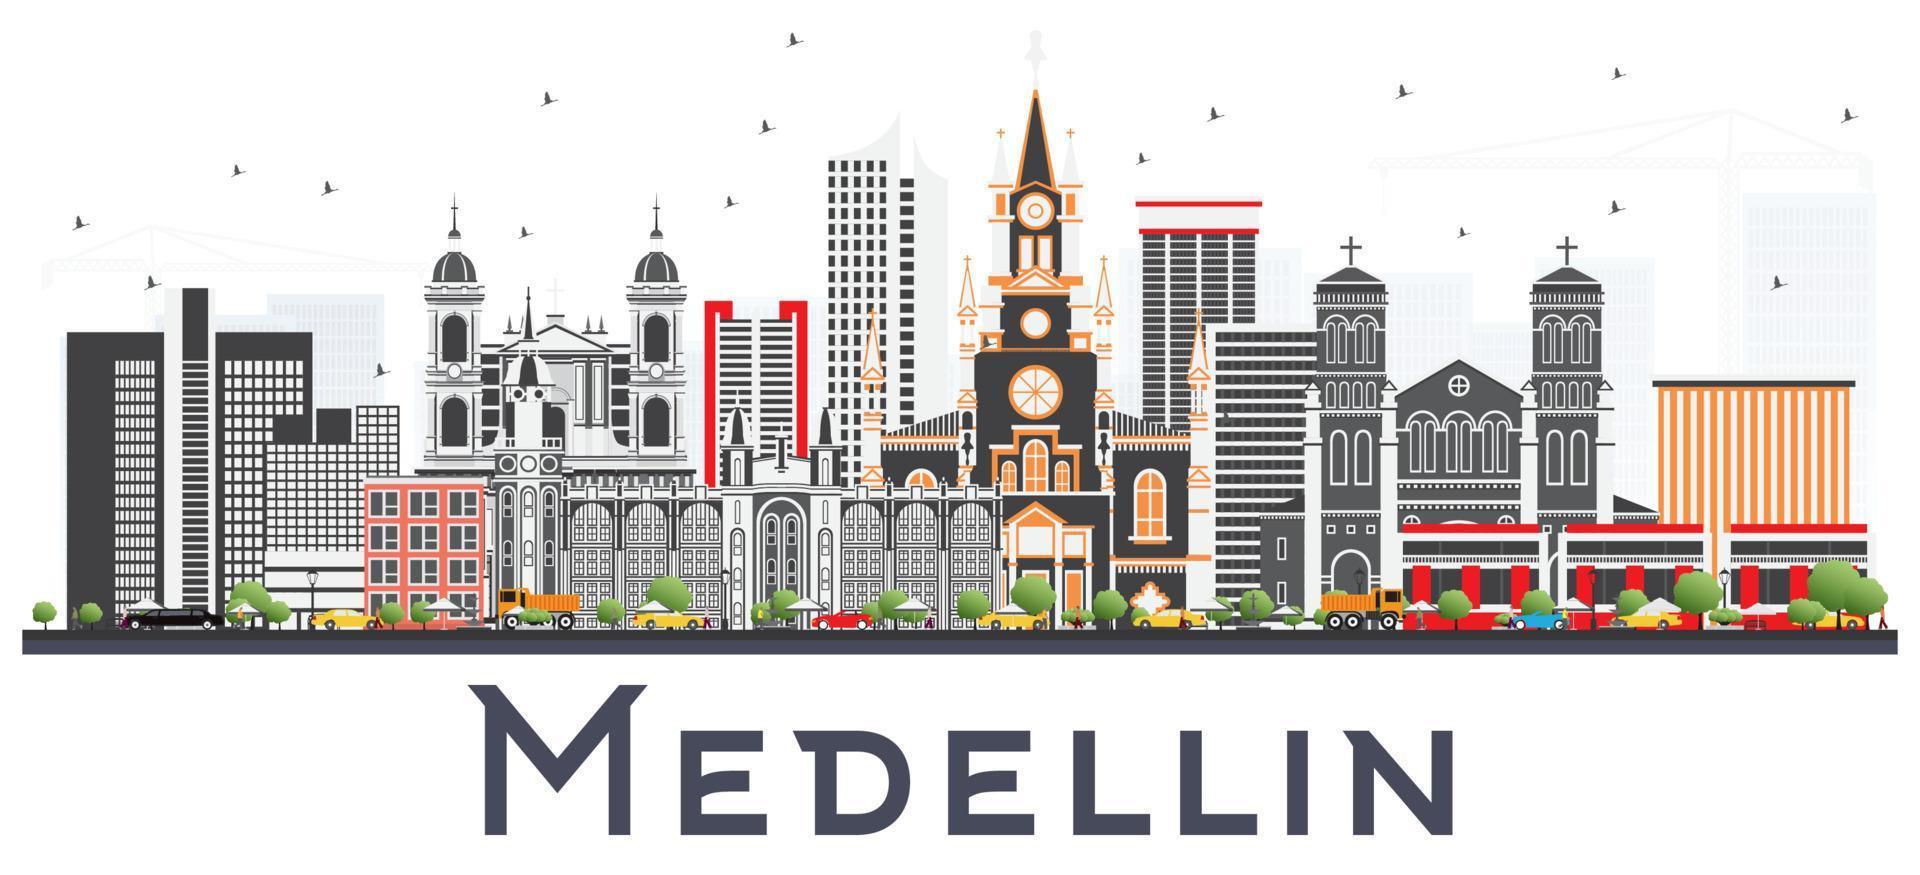 Medellin Colombia City Skyline with Gray Buildings Isolated on White Background. vector